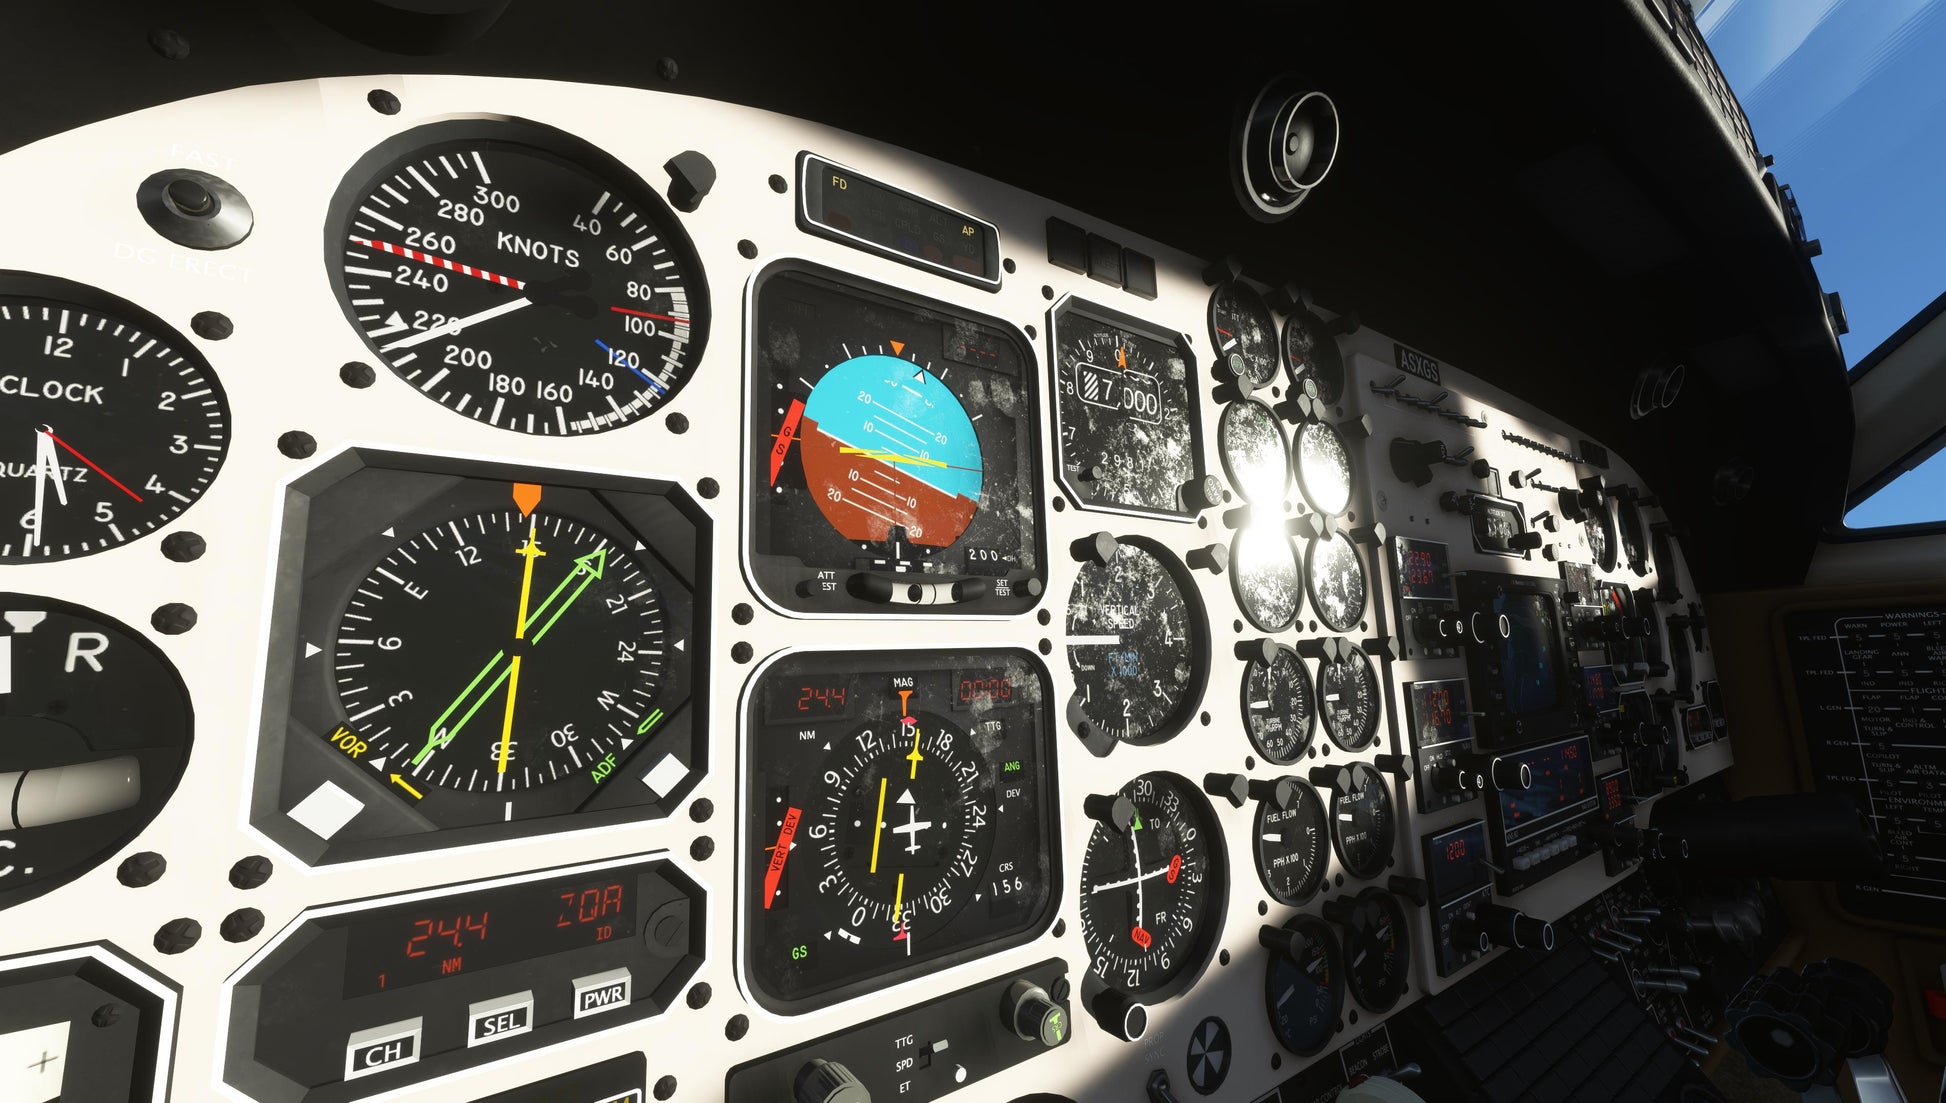 Microsoft Flight Simulator: Steam users want refund time extension - PC -  News 